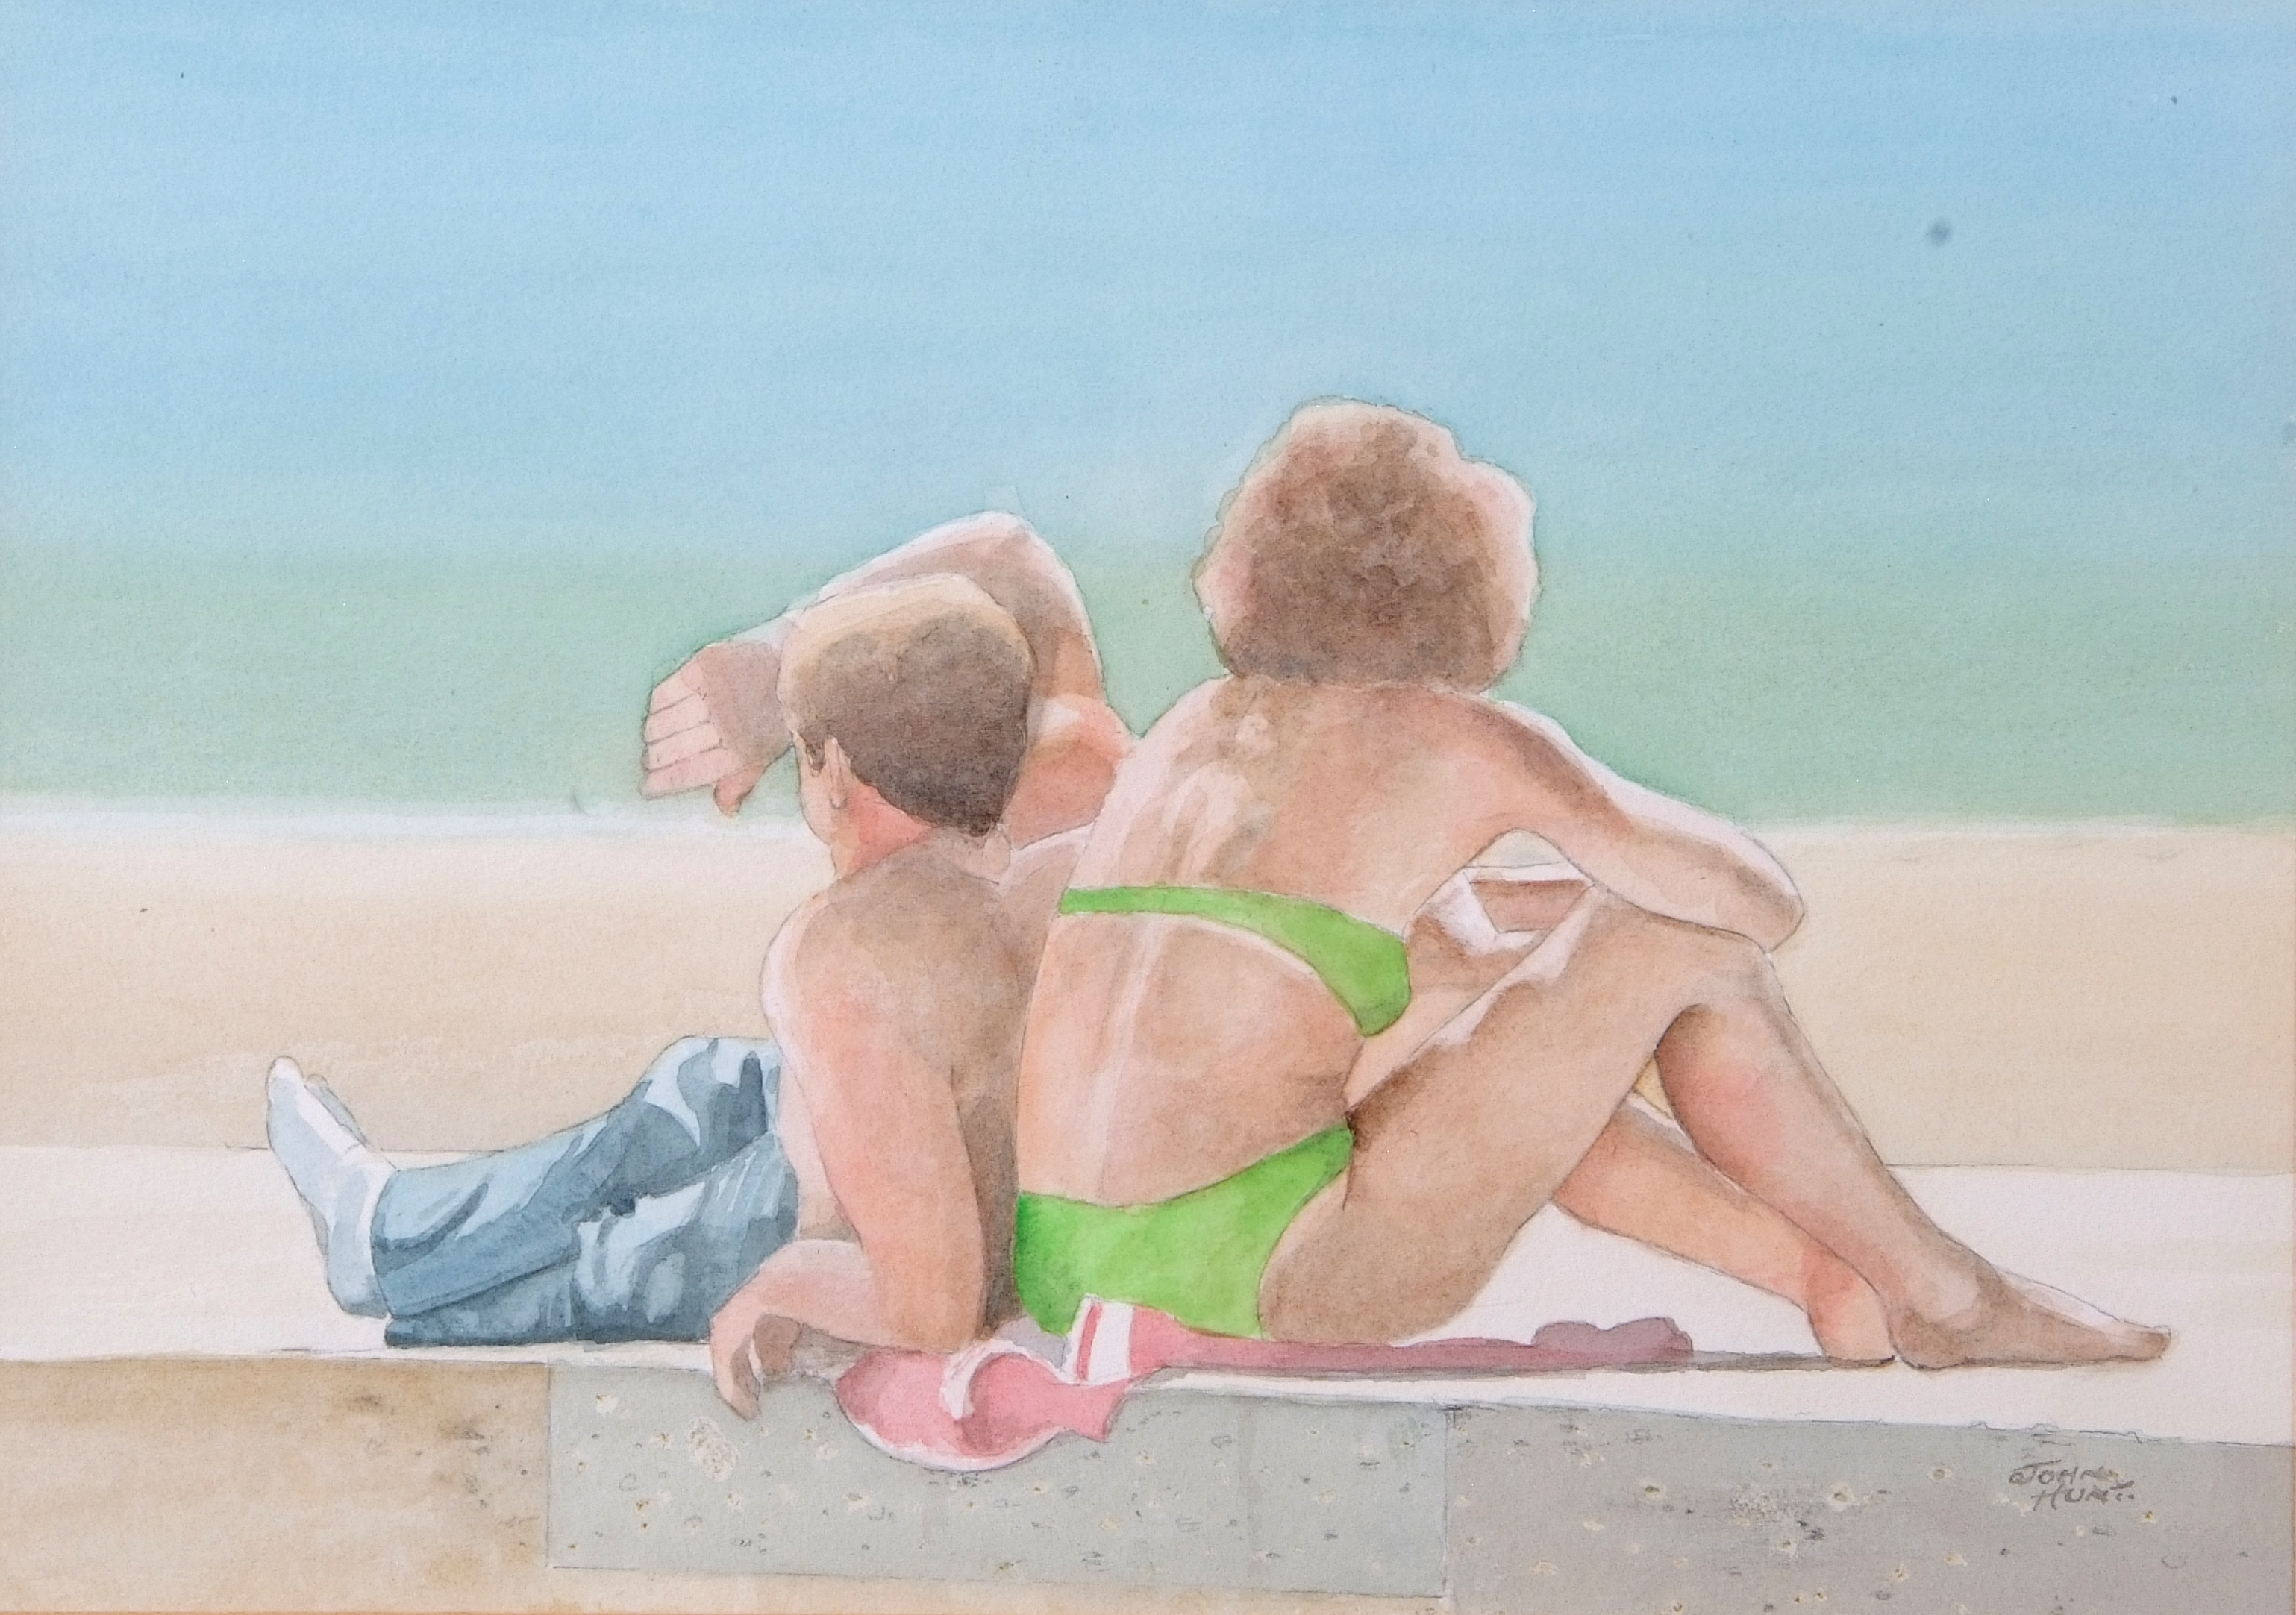 John Hunt (British 20th Century), The Bathers (x3), pencil, watercolour, signed, 10 x 14ins, 11 x - Image 7 of 7